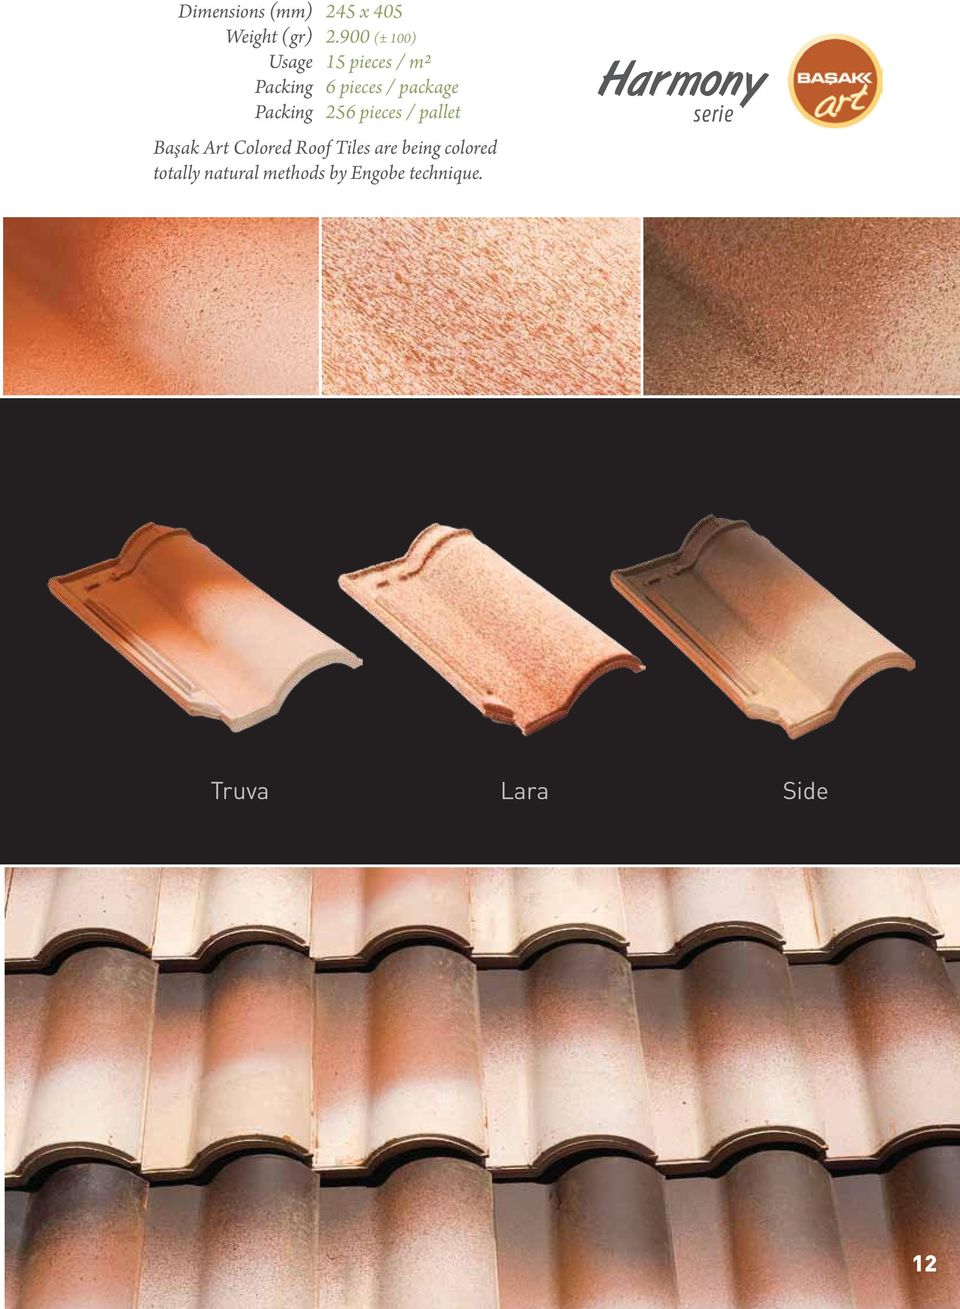 Colored Roof Tiles are being colored totally natural